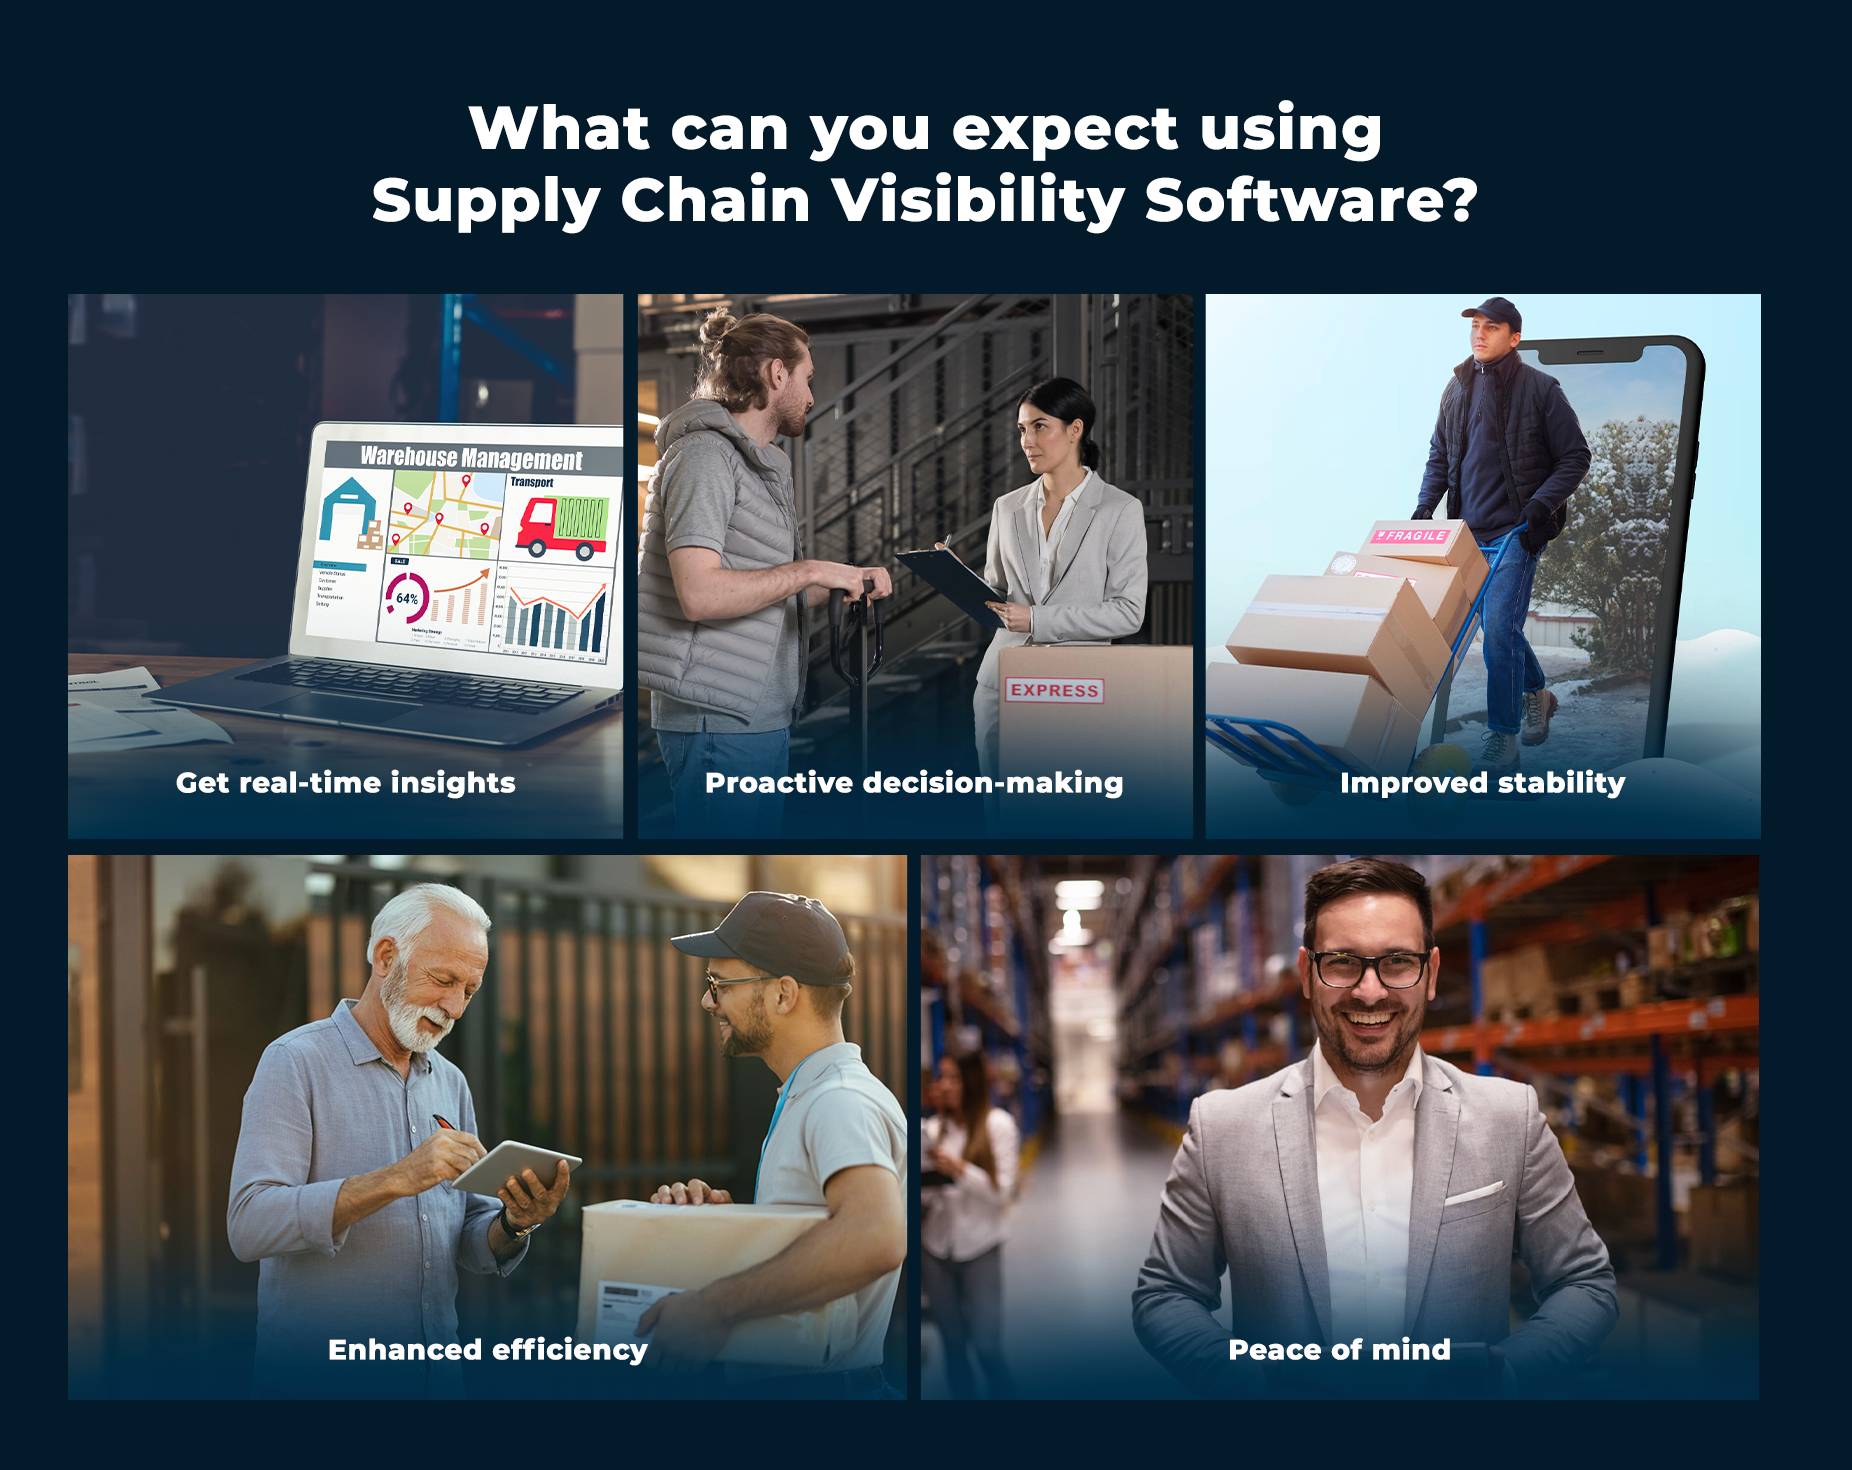 Benefits of supply chain visibility software